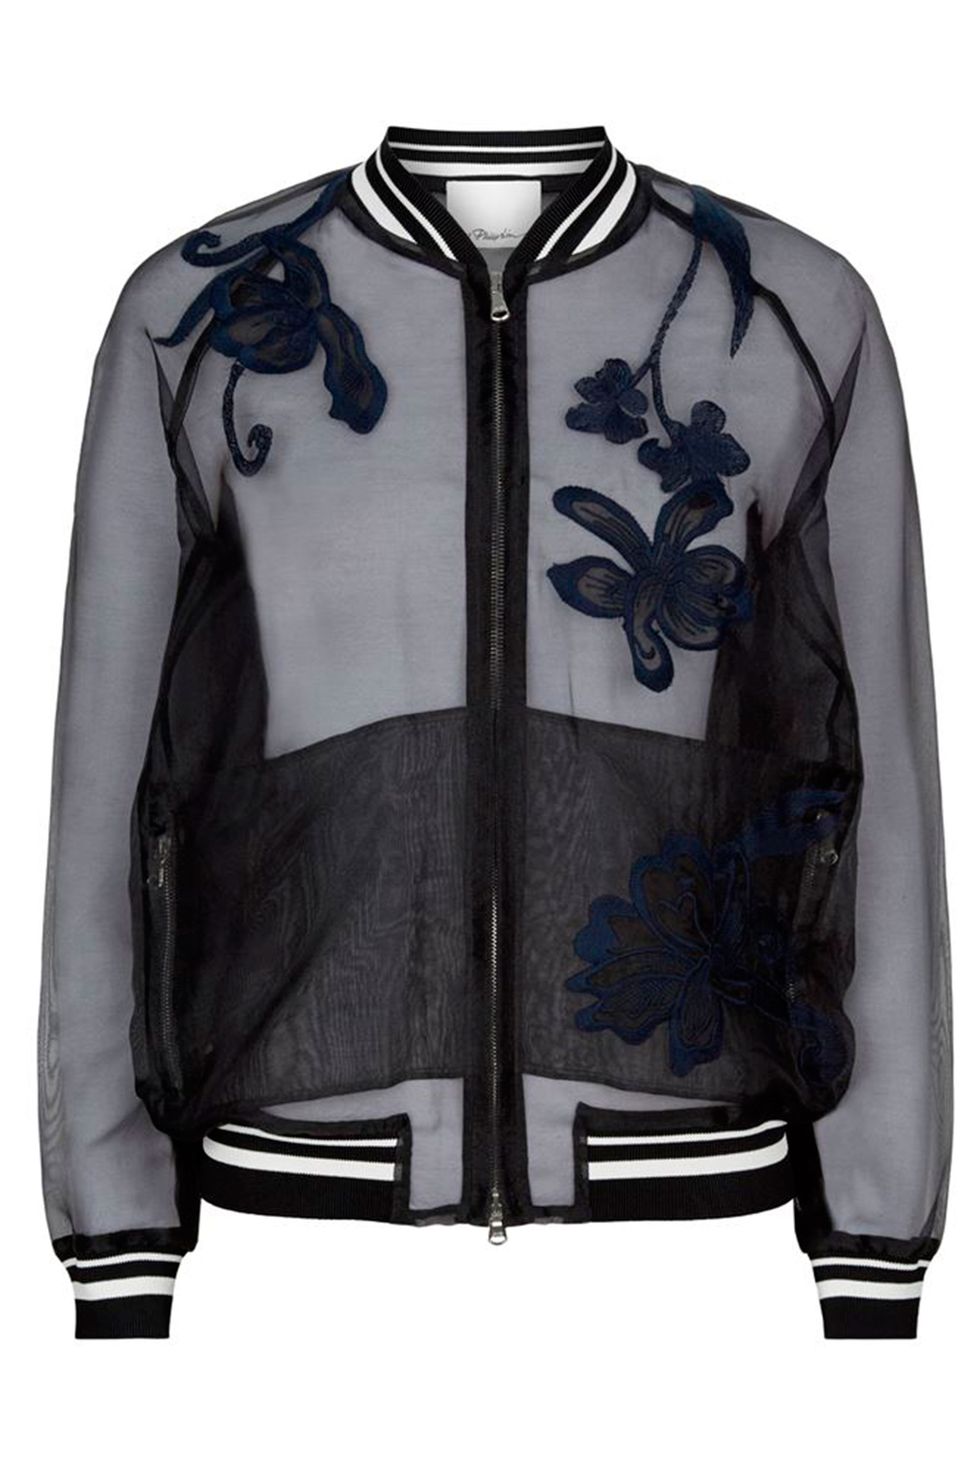 The best bomber jackets to buy now